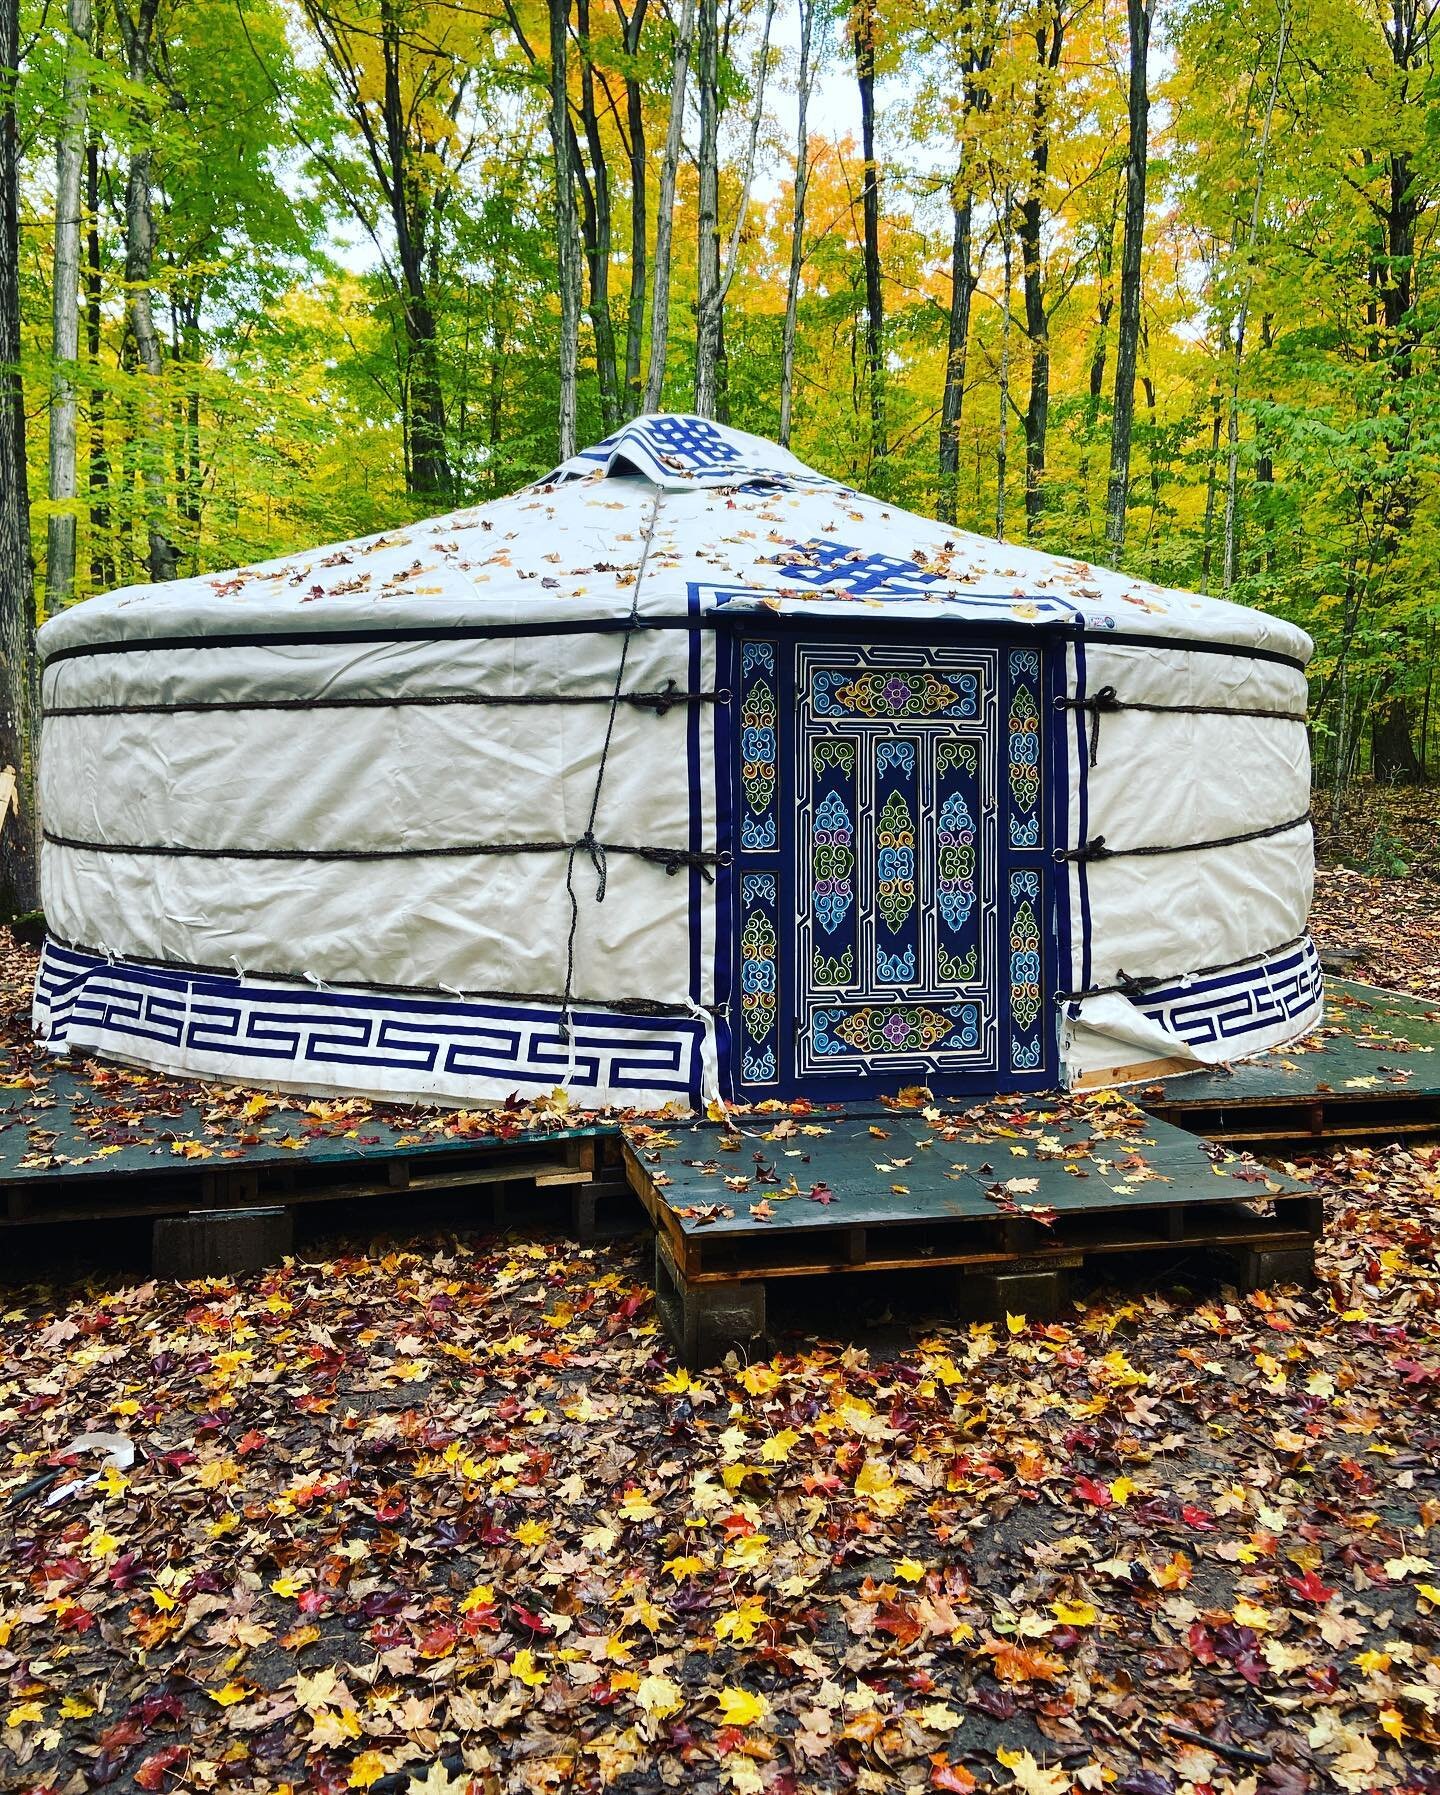 Well, it is official! I am living in my YURT!⁣
⁣
What a journey this has been, over the last 6 months.  To be sitting by the wood stove, gazing around at the beauty of this space feels like a dream.⁣
⁣
I have learned SO many lessons along the way.  R